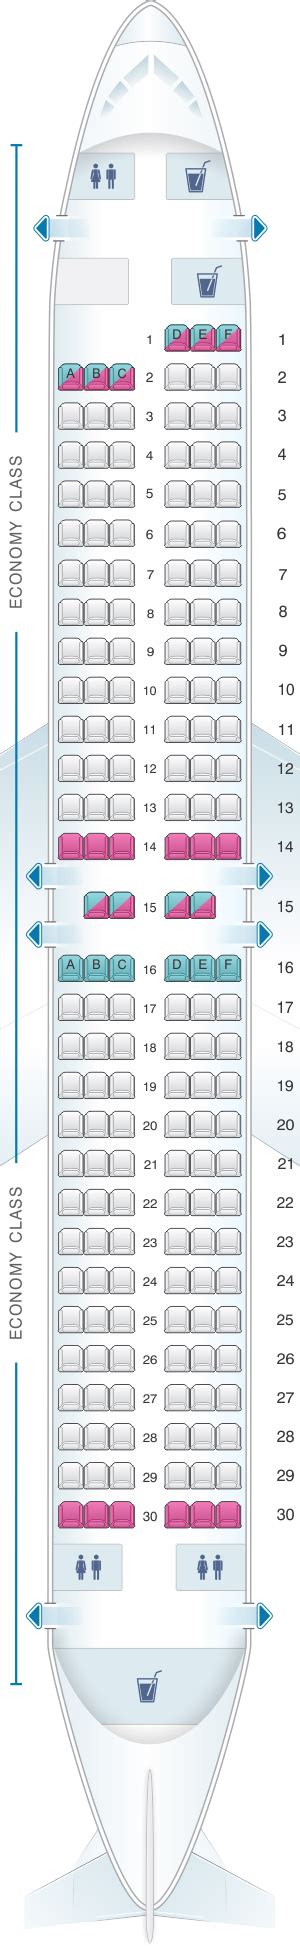 Seat map for southwest airlines. Southwest Airlines uses Boeing 737s exclusively in its fleet. The exit rows on the right (rows 11 and 12) have standard pitch at 32-inches for this aircraft. Seats with the best pitch are rows 1-10 on the RIGHT with 33-inch pitch. Learn how to secure a good seat on Southwest flights at FlyerGuide.com 